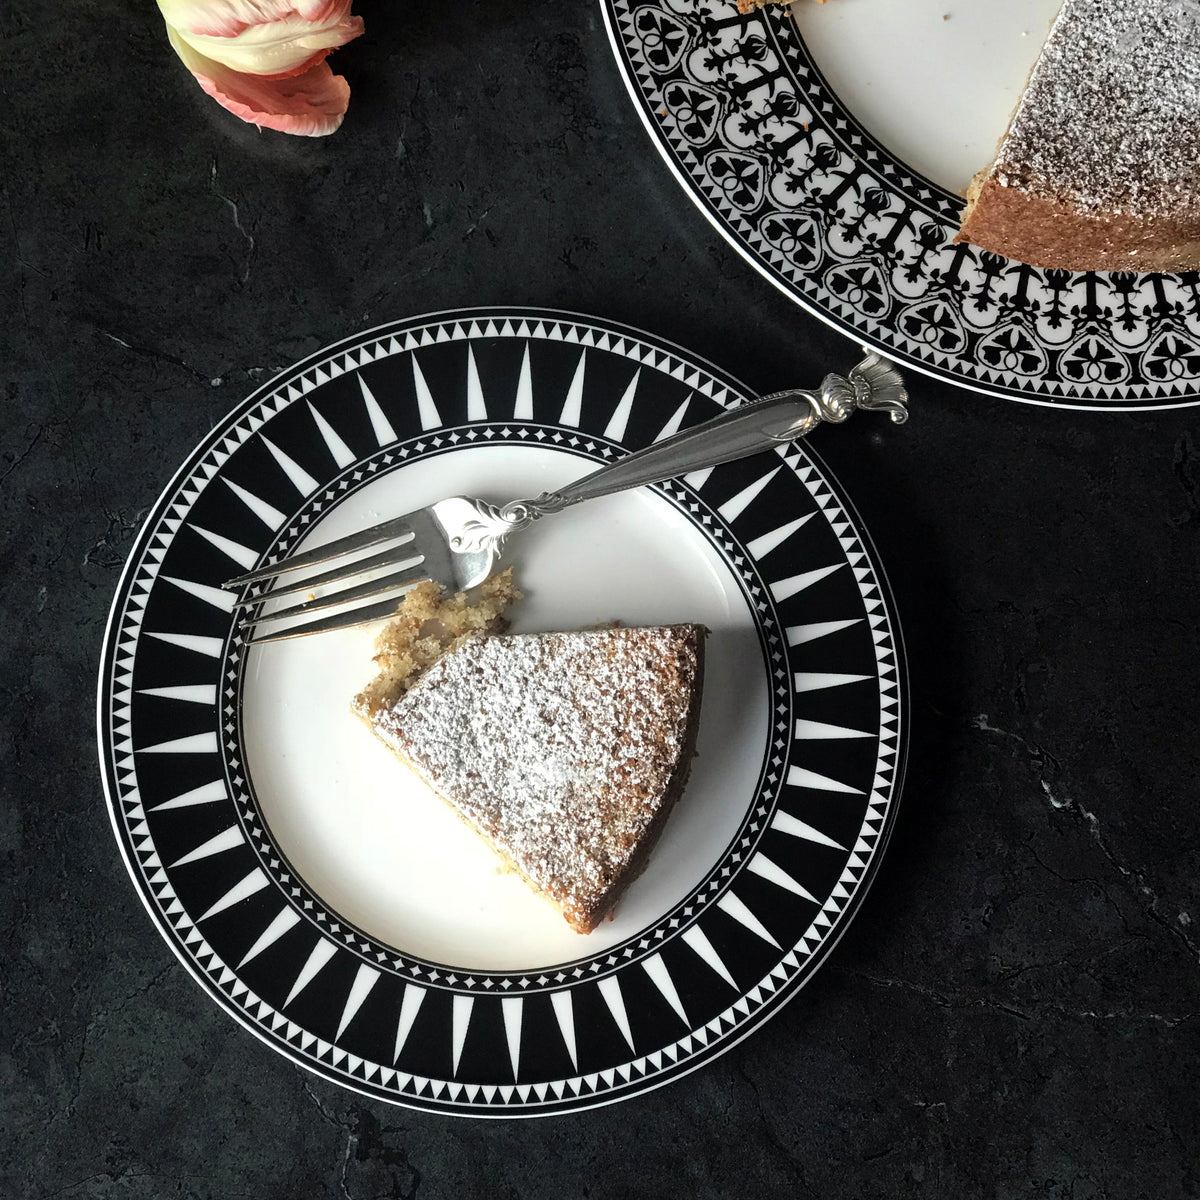 A slice of cake with powdered sugar on a Marrakech Salad Plate from Caskata Artisanal Home.